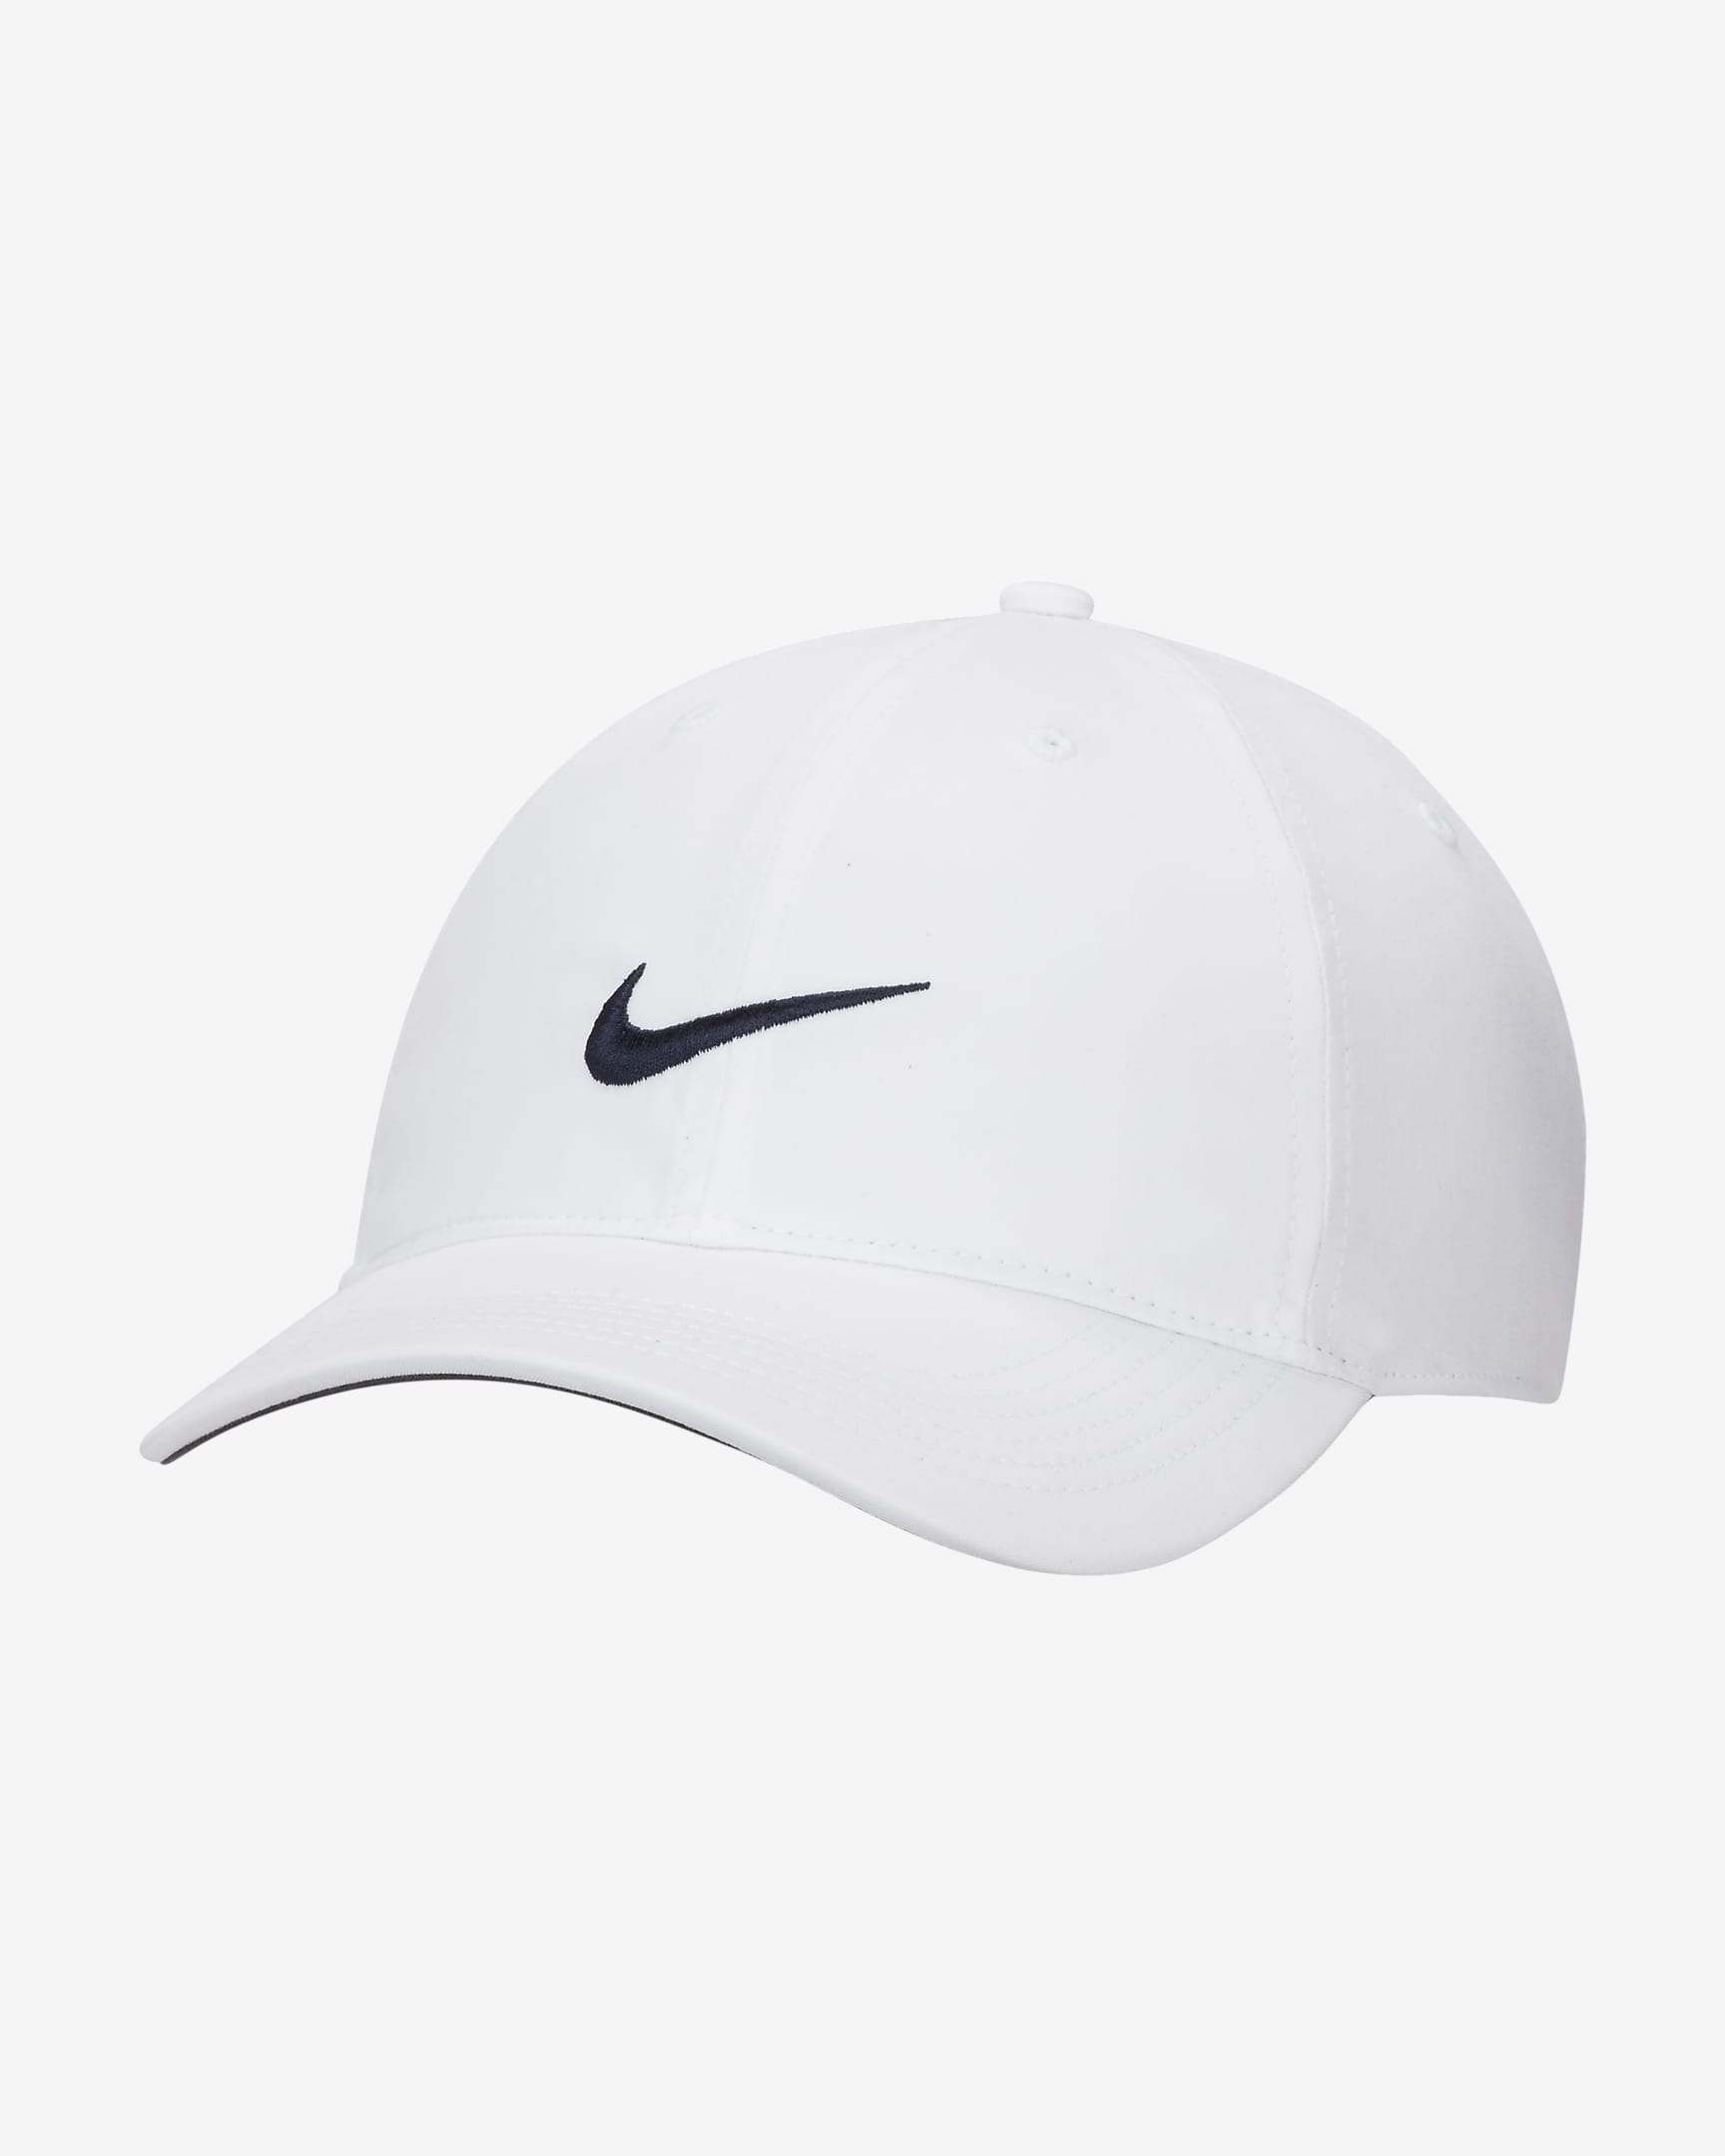 Nike AeroBill Heritage86 Player Golf Hat White/Anthracite/Obsidian